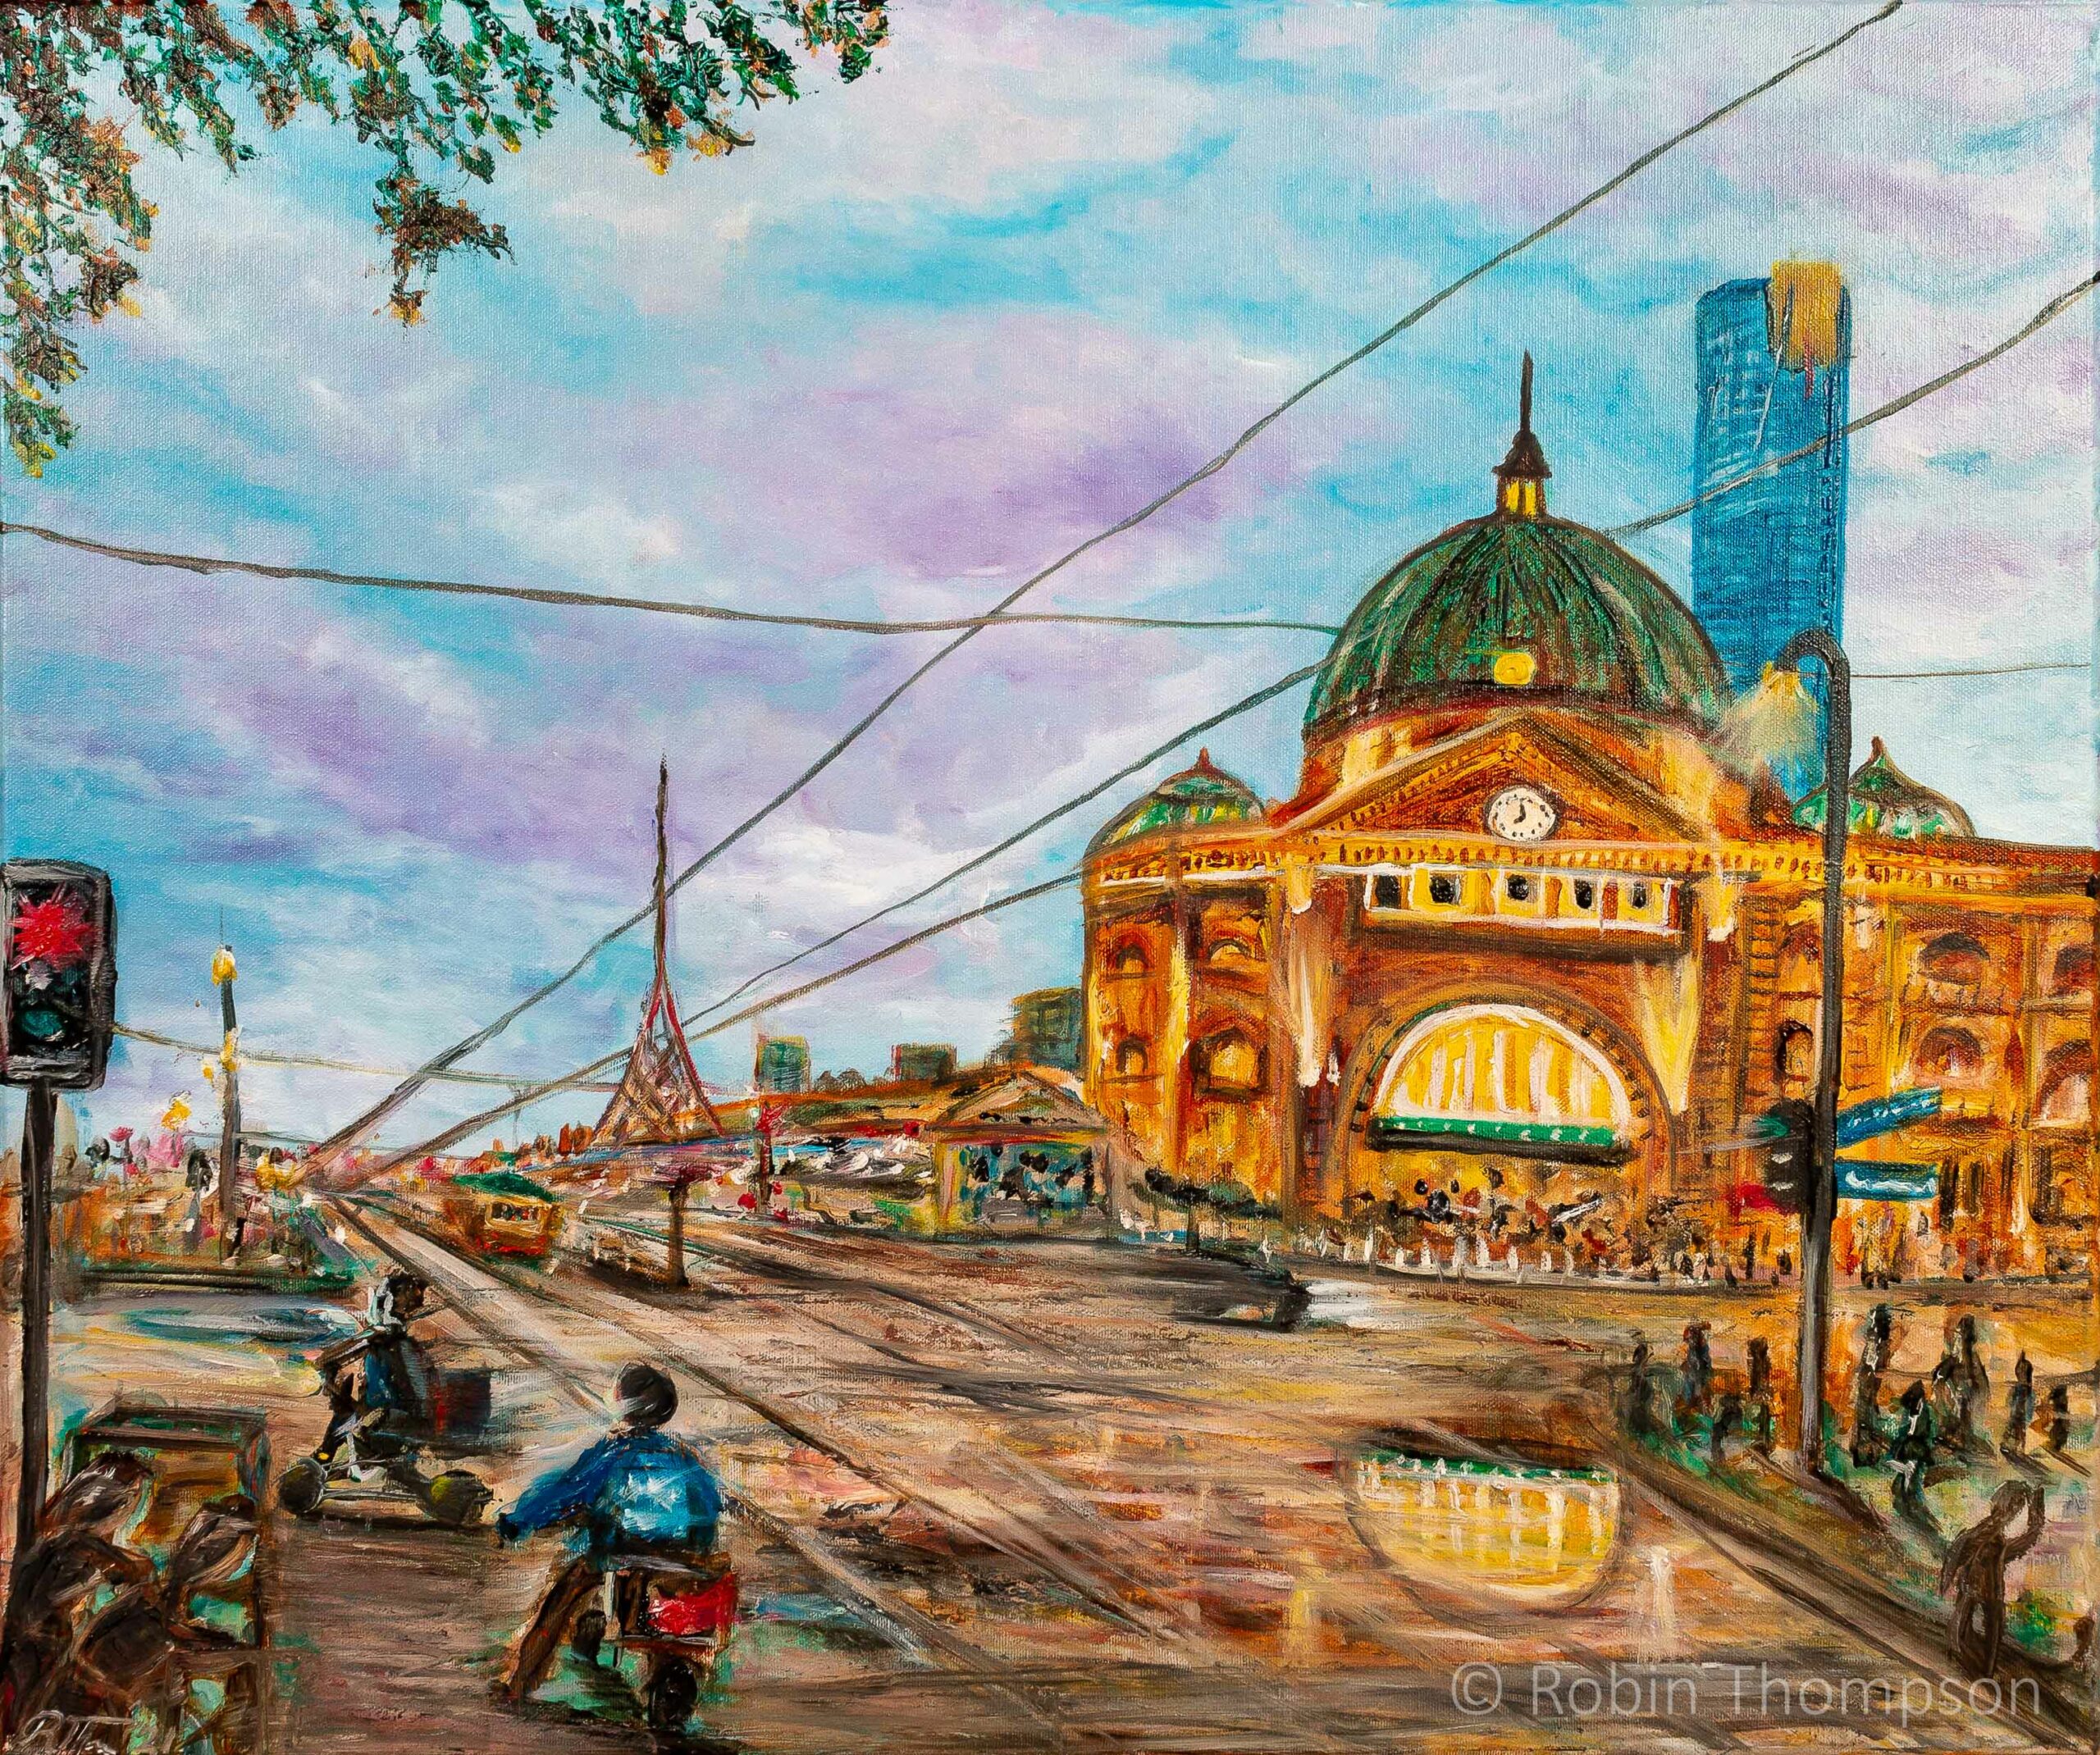 Acrylic painting showing a train station lit up in yellow and gold, with a blue and purple sky, and many people/drivers/motorcyclists in the foreground going about their business.